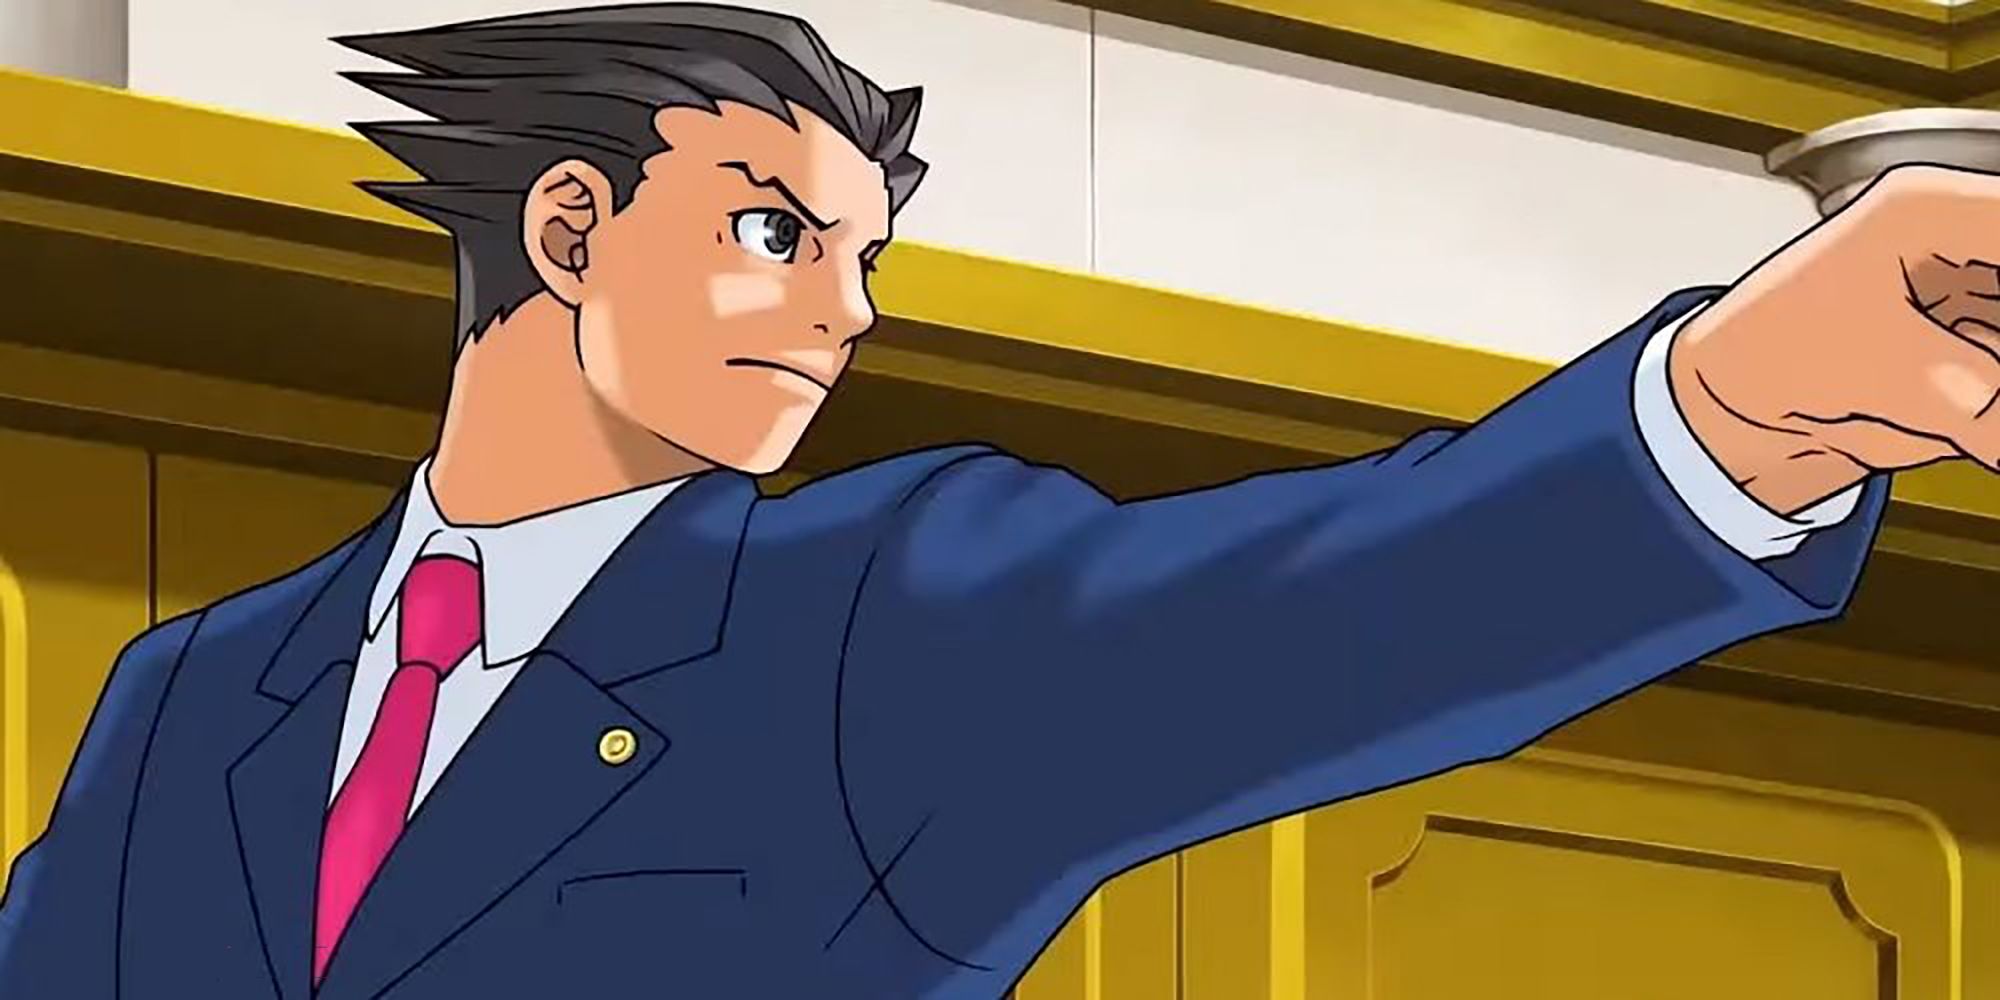 Phoenix Wright points in the court room in the Ace Attorney Trilogy.